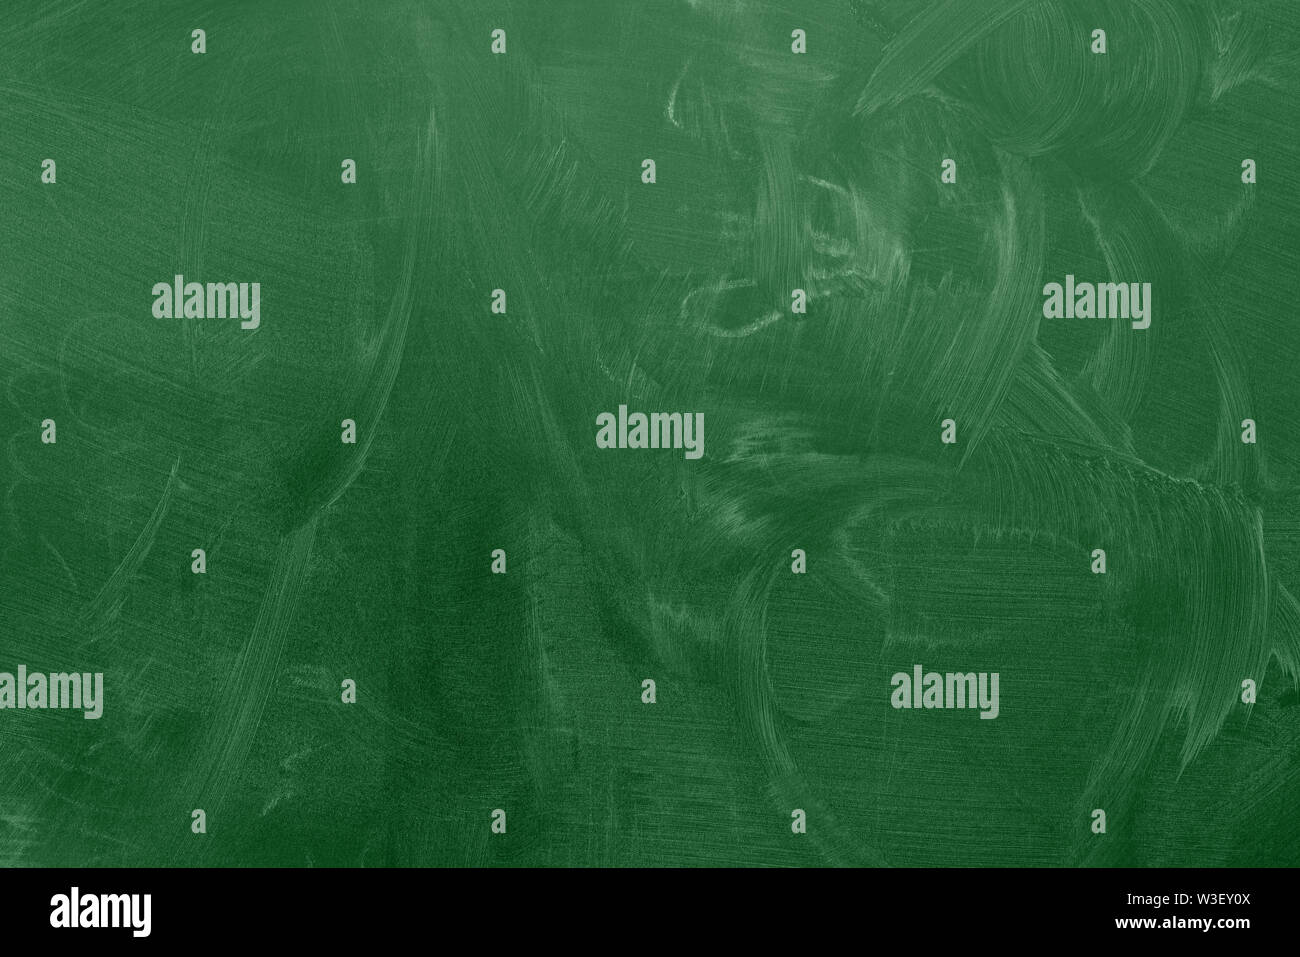 green classroom chalkboard or blackboard with chalk stains background Stock Photo